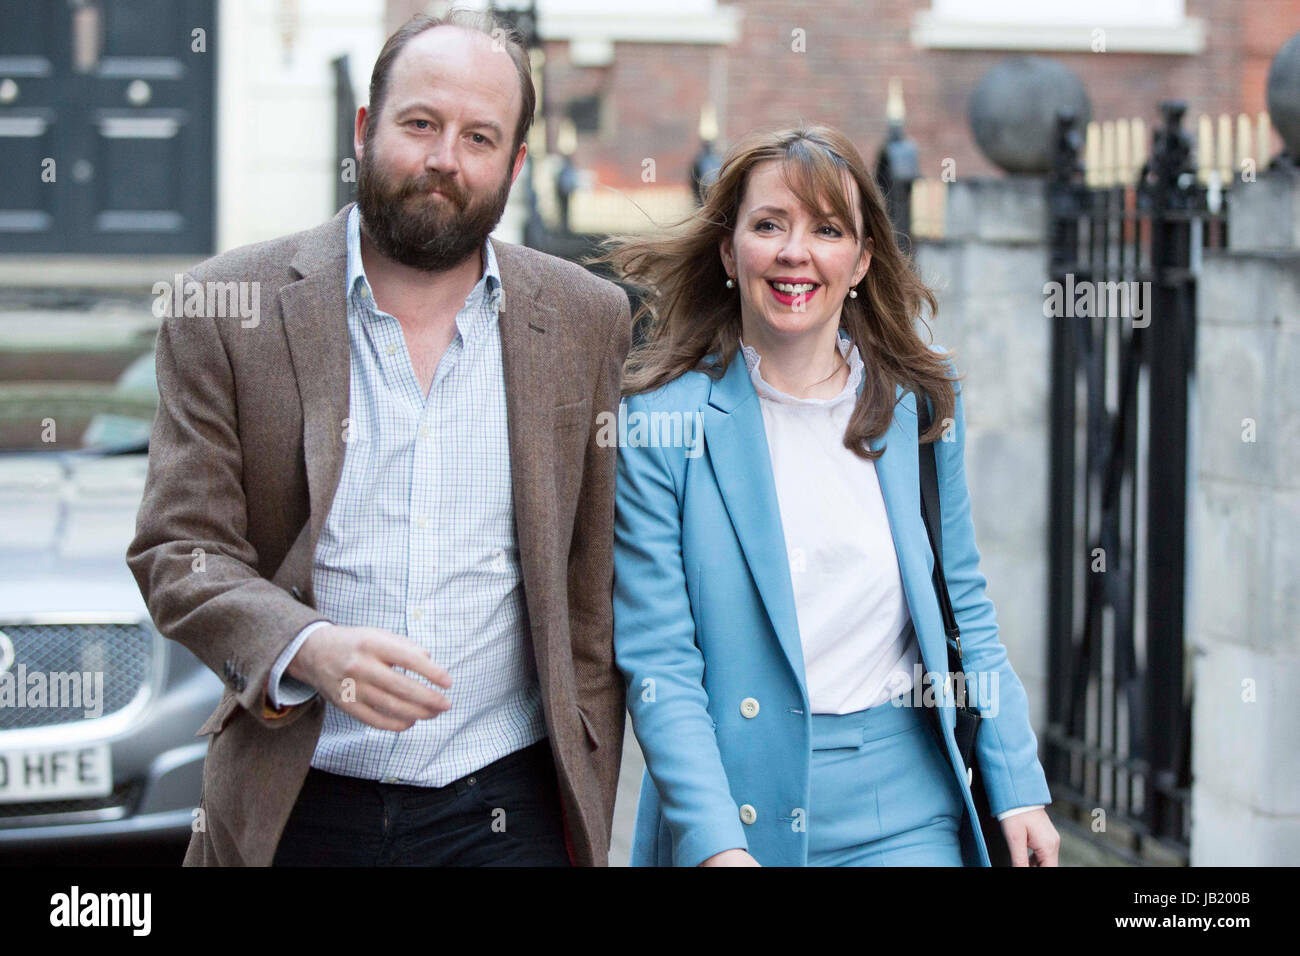 Prime Minister Theresa May's chief of staff Nick Timothy and Joint-chief of staff Fiona Hill leave Conservative Party HQ in Westminster, London, as Mrs May's future as Prime Minister and leader of the Conservatives was being openly questioned after her decision to hold a snap election disastrously backfired. Stock Photo